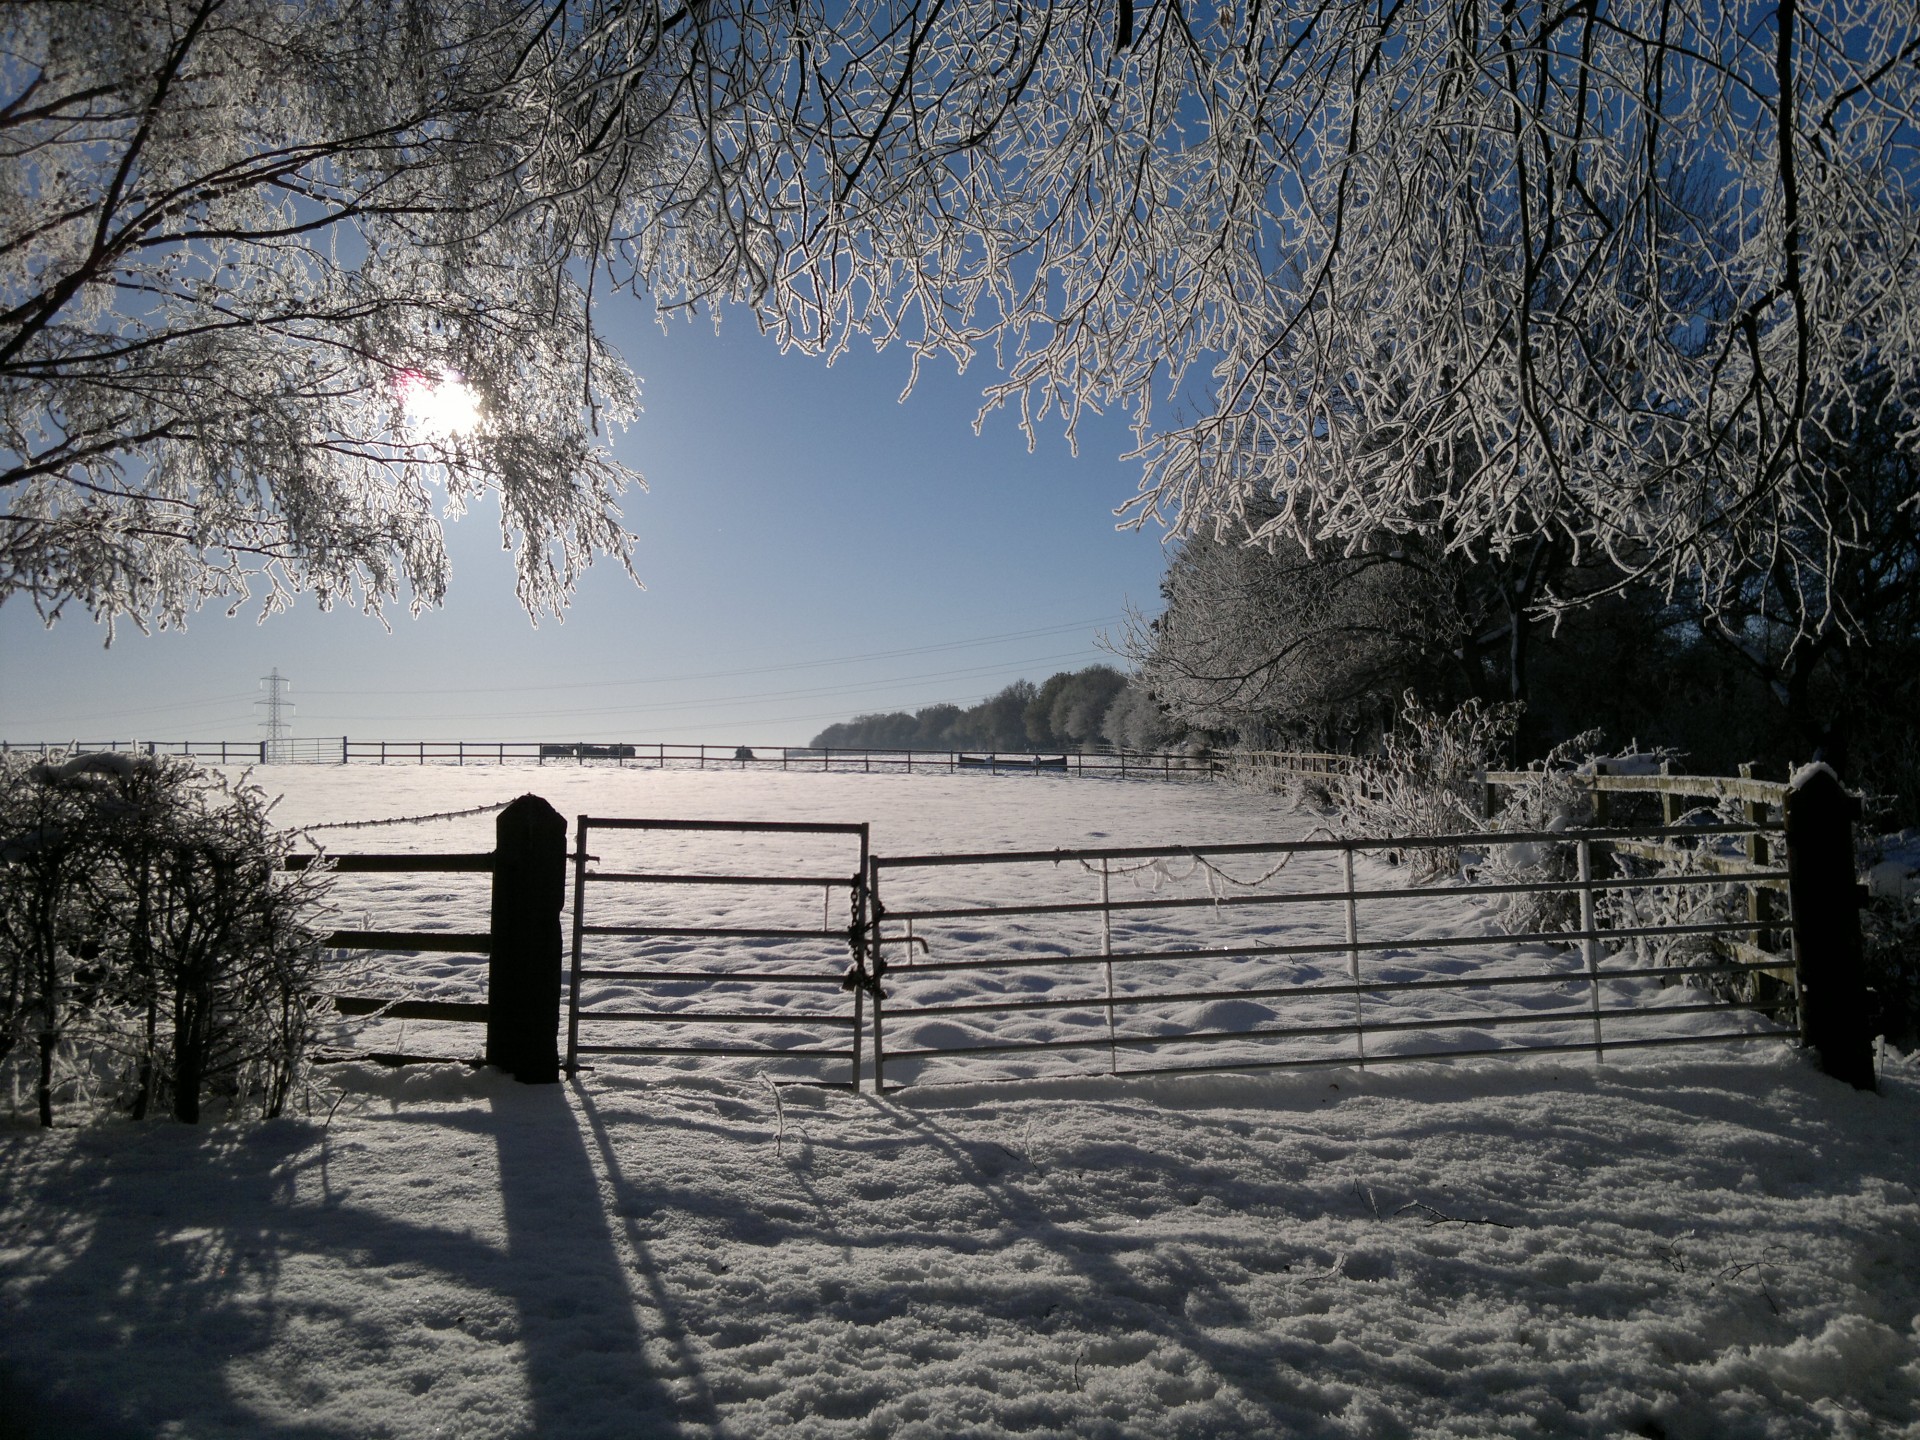 A beautiful early morning snow scene and blue sky with the sunlight making everything glow